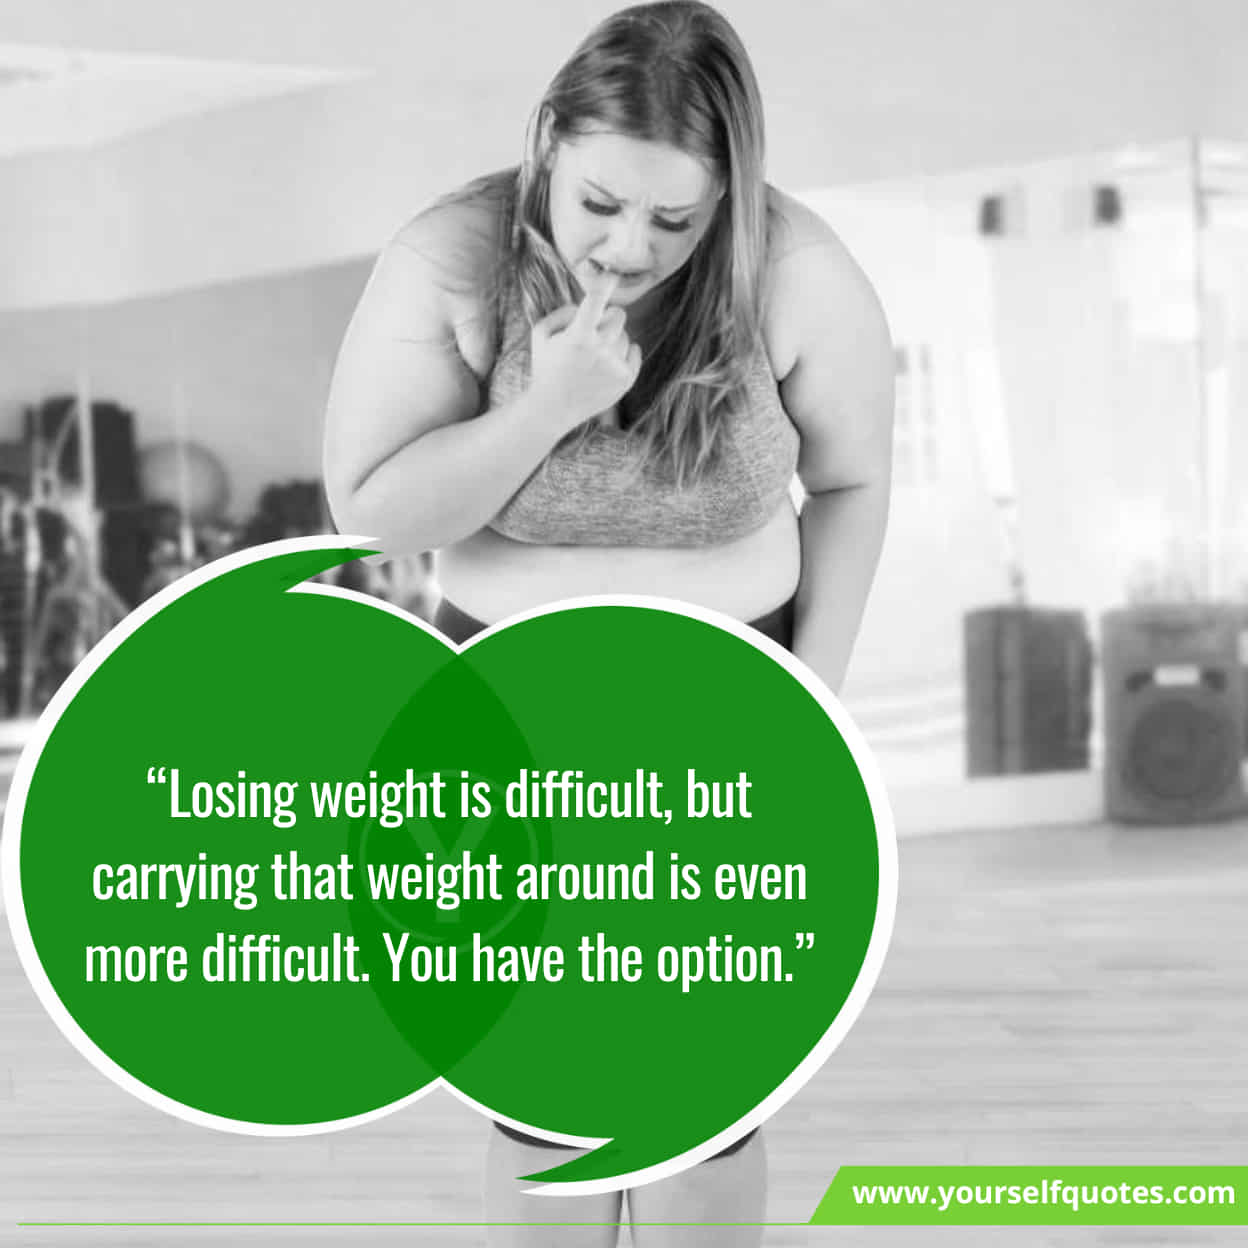 66 Weight Loss Motivation Quotes To Motivate You Lose Weight Immense Motivation